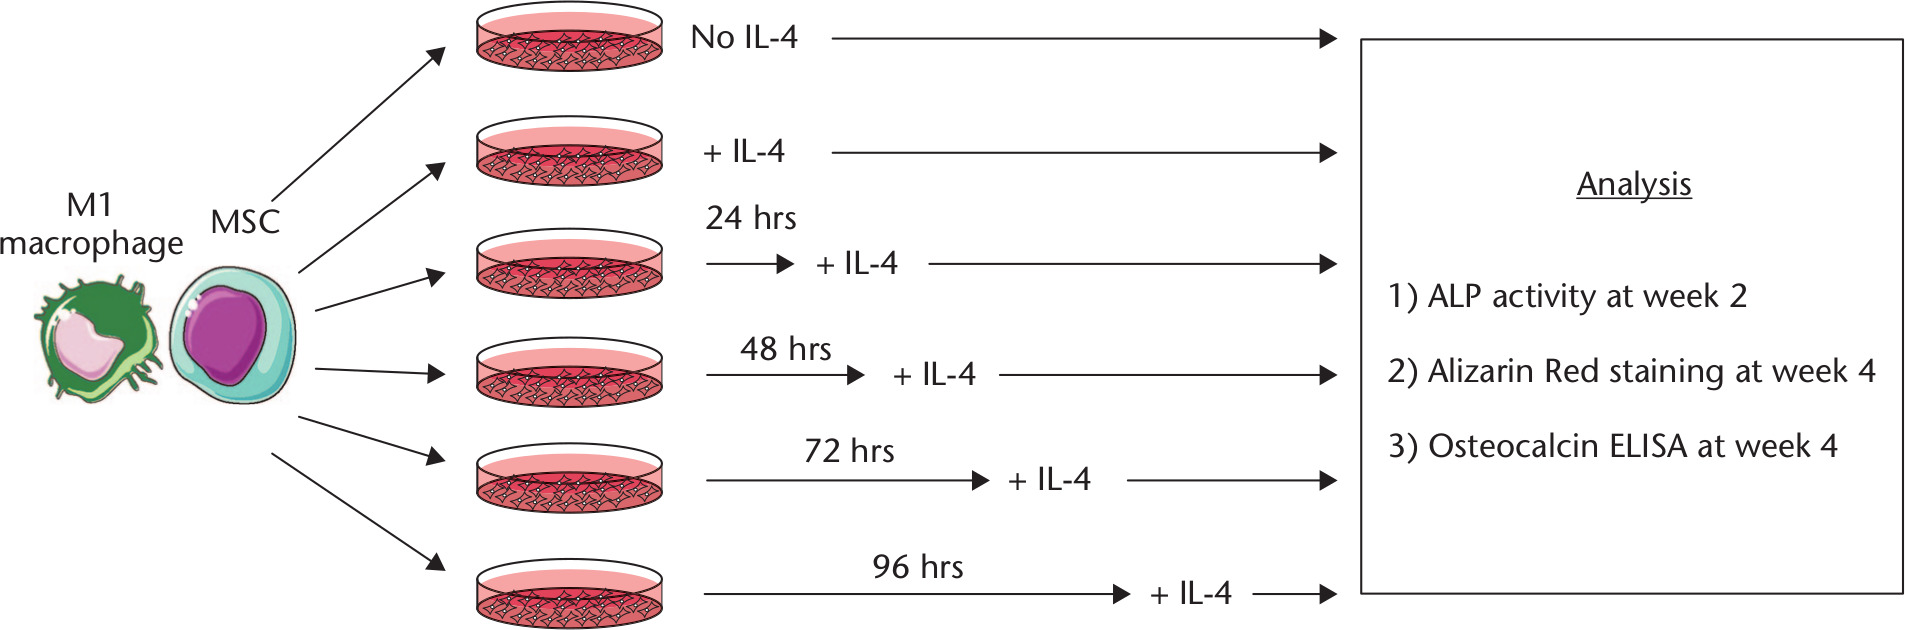 Fig. 1 
            Schematic demonstrating experimental methodology. Proinflammatory macrophages (M1s) were plated with mesenchymal stem cells (MSCs), at which point interleukin (IL)-4 was added immediately, after 24 hours, after 48 hours, after 72 hours, or after 96 hours. Controls included M1s cultured with MSCs with no IL-4 added, a negative control (MSCs alone in nonosteogenic growth media, not shown), and a positive control (MSCs alone in mixed osteogenic-macrophage media, not shown). Osteogenesis outcome measures included alkaline phosphatase (ALP) activity at two weeks, Alizarin Red staining at four weeks, and osteocalcin secretion at four weeks. ELISA, enzyme-linked immunosorbent assay.
          